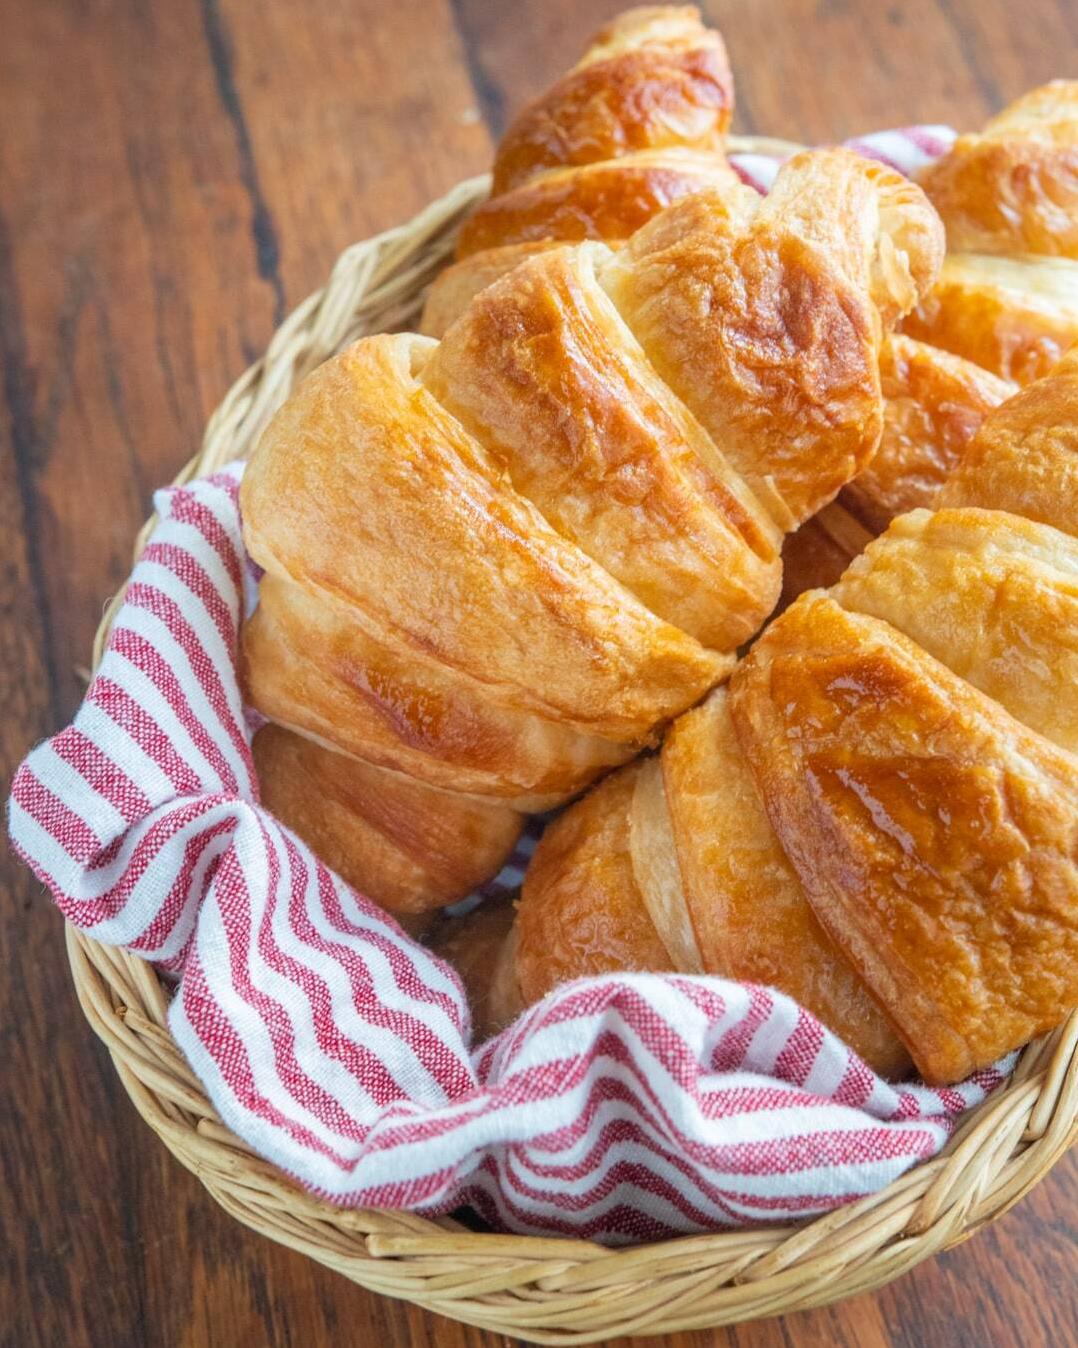  Rise and shine with these flaky vegan croissants!